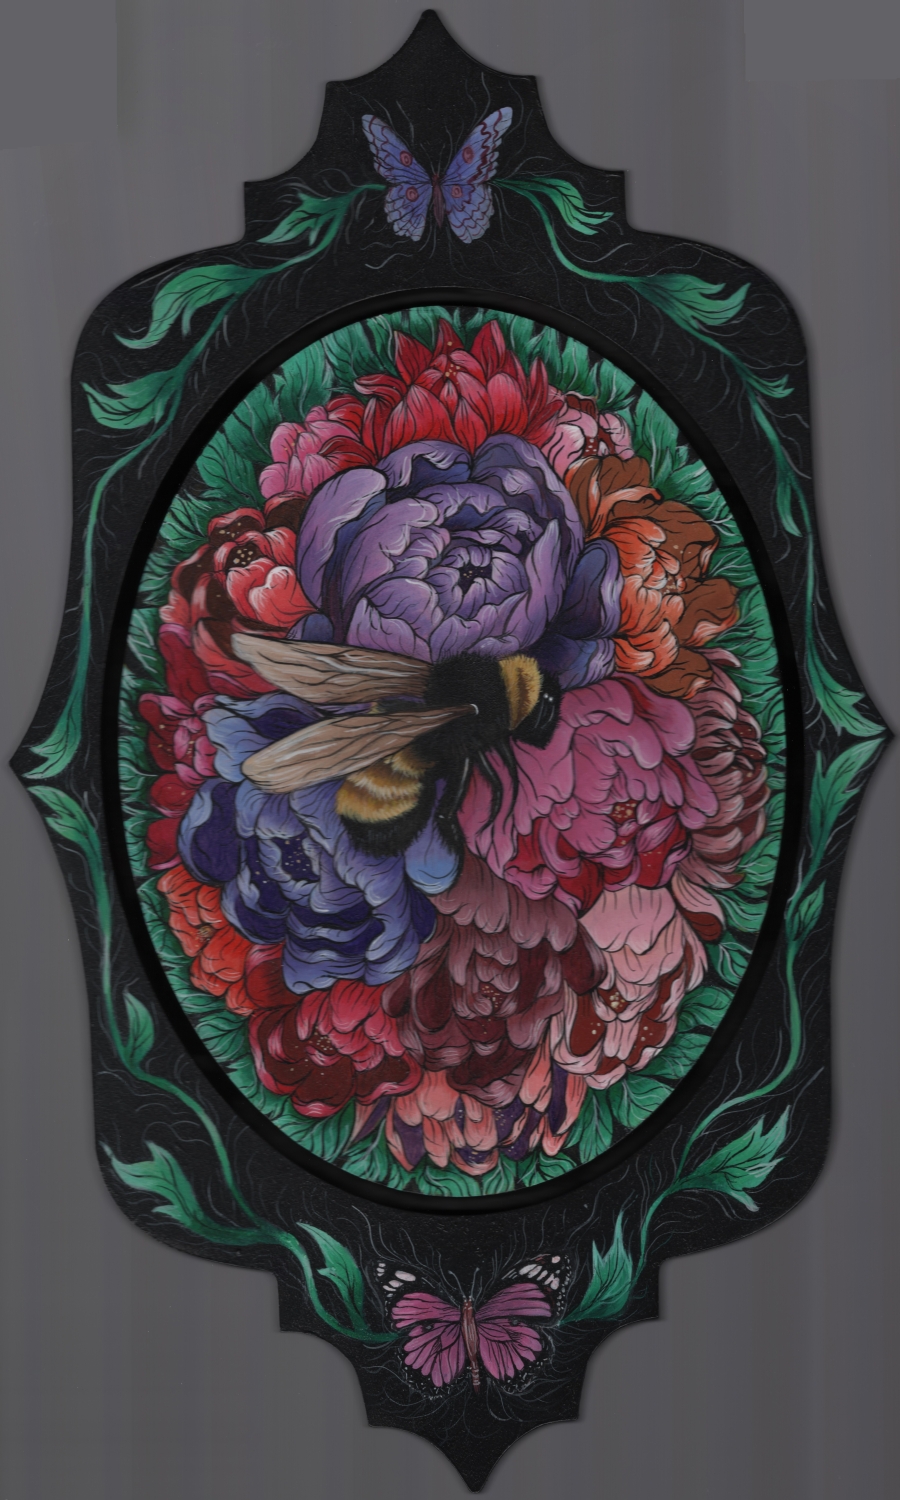 Queen Bee12 in. x 20 in. Acrylic on Wood Ornate Cut